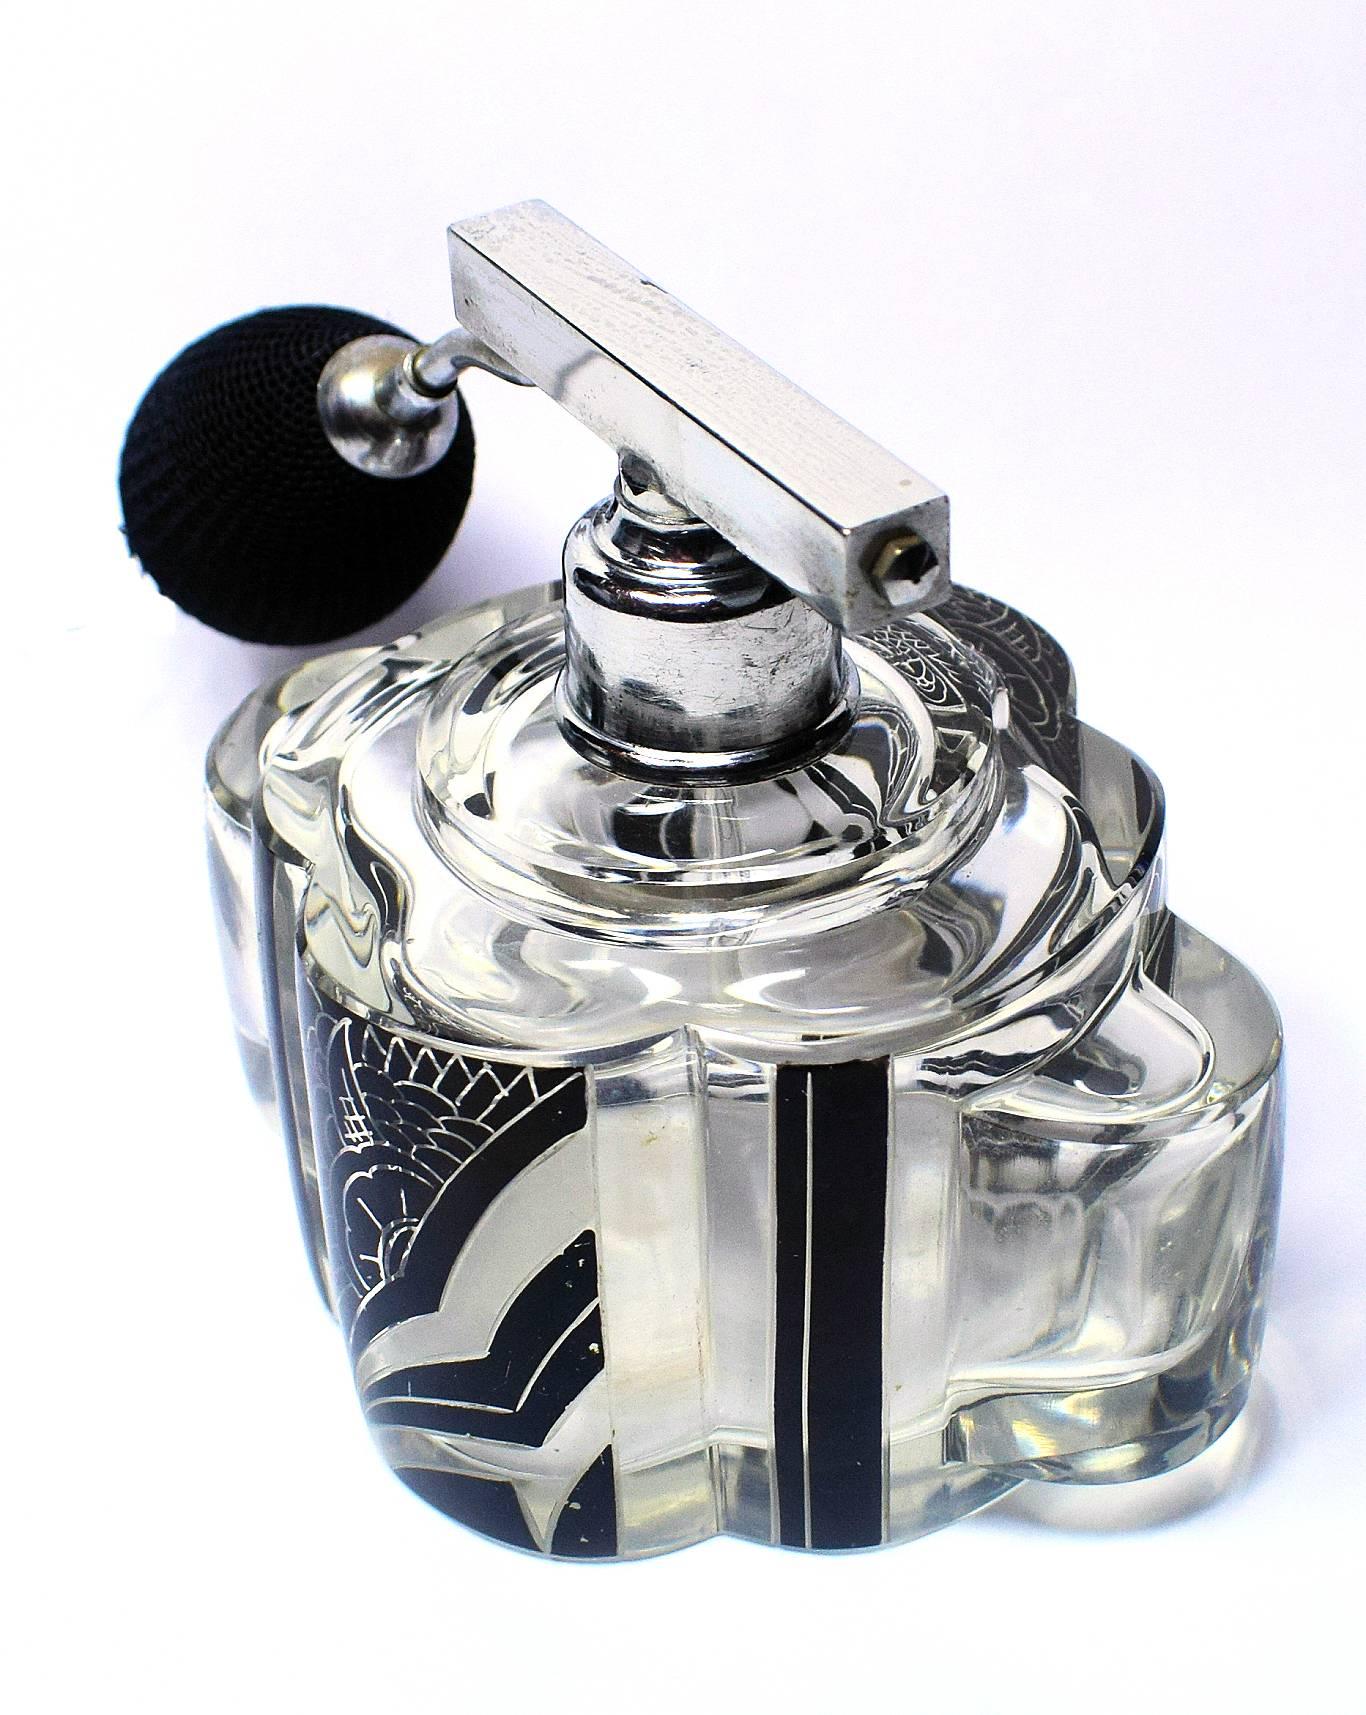 This rare scent bottle is an absolute delight, one can't be distracted away from it's actual size, it's at least twice the size of the normal Czech Karl Palda perfume bottles that one normally finds. The black enamel decoration is in excellent